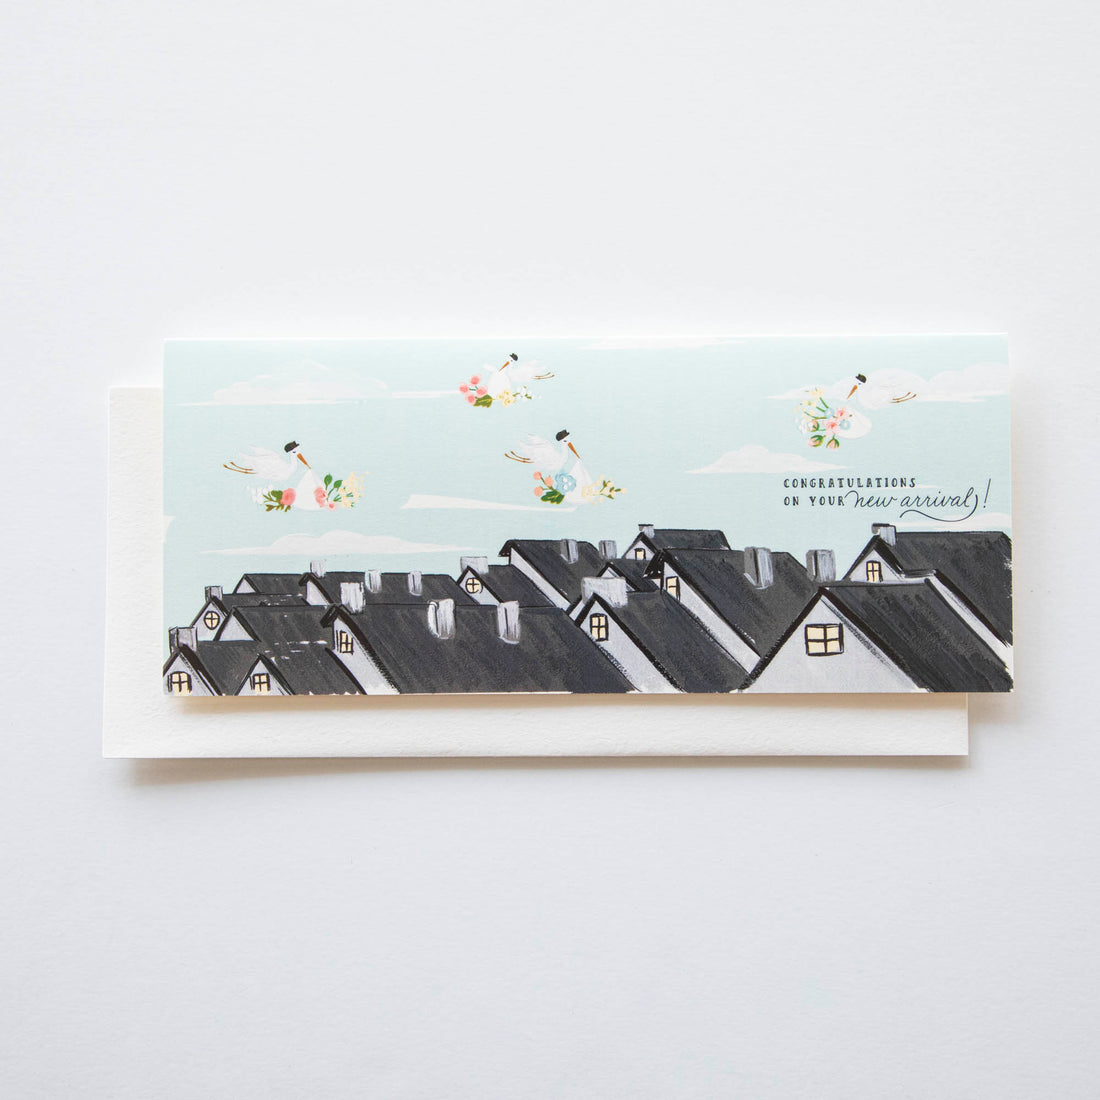 An illustration on a Rooftop Special Delivery baby arrival card from The First Snow featuring a row of houses with the text &quot;congratulations on your new arrival!&quot; above them, surrounded by images of flowers and storks in the sky.